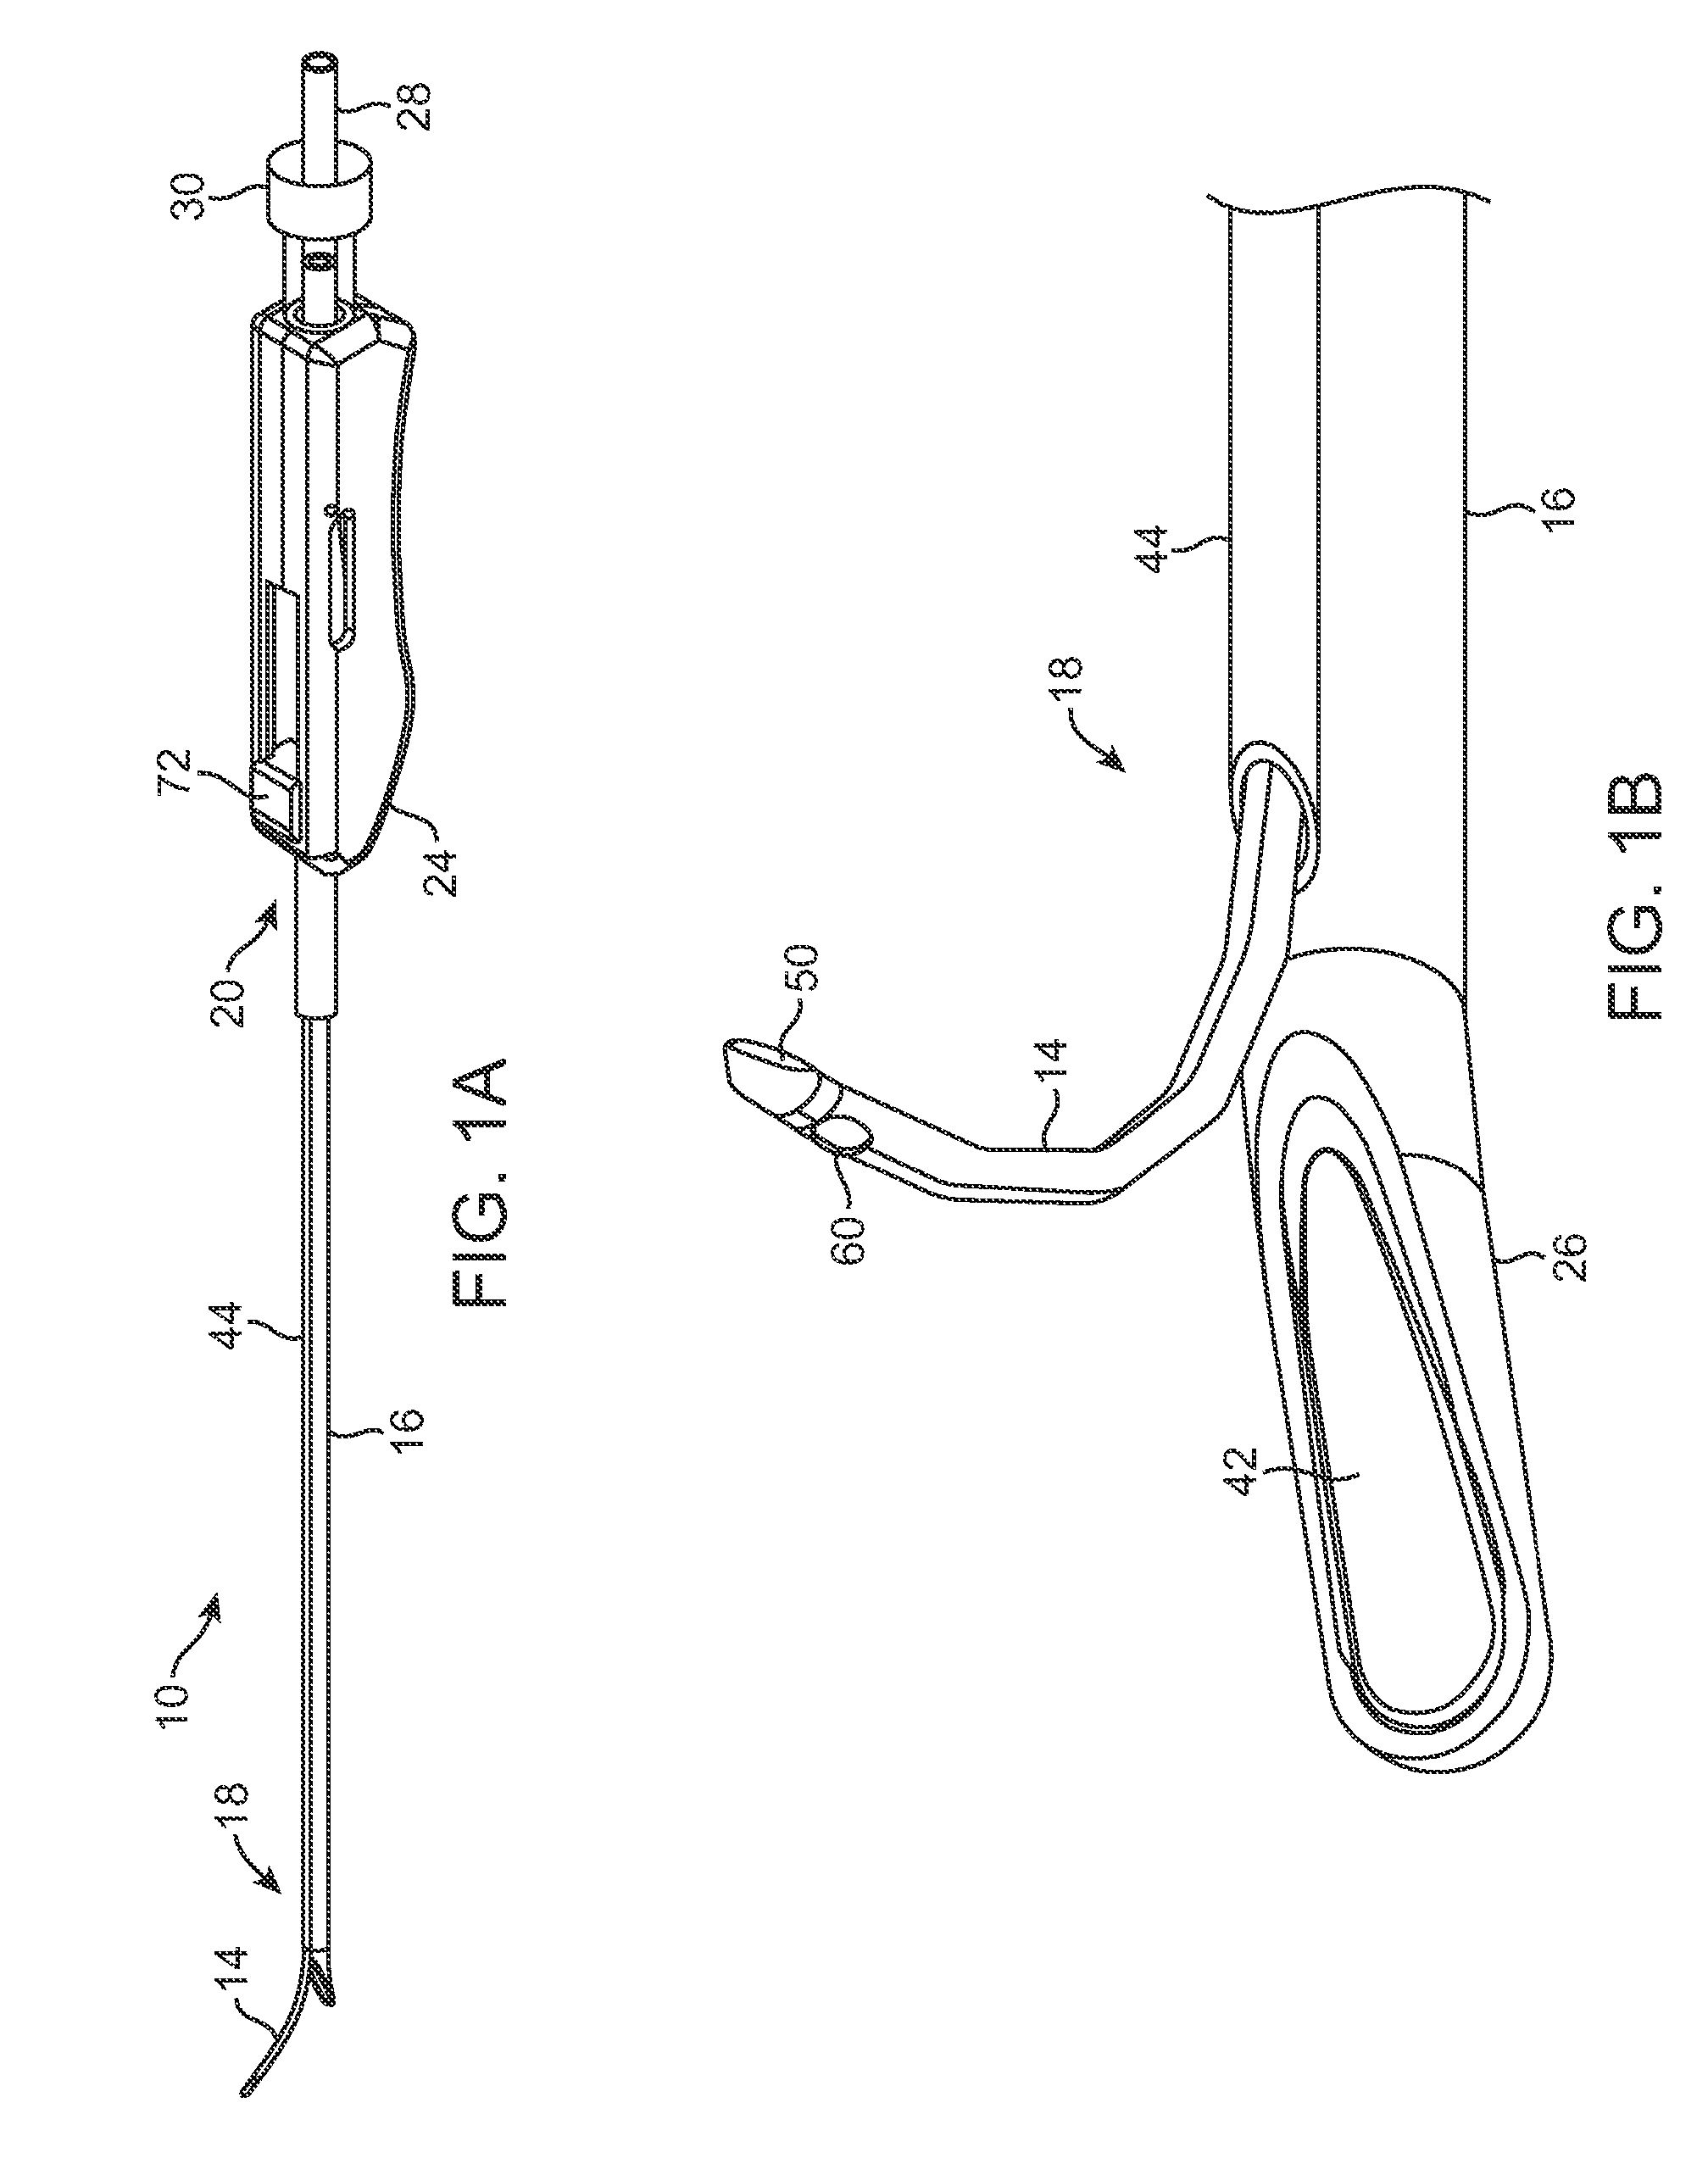 Rigid delivery systems having inclined ultrasound and needle